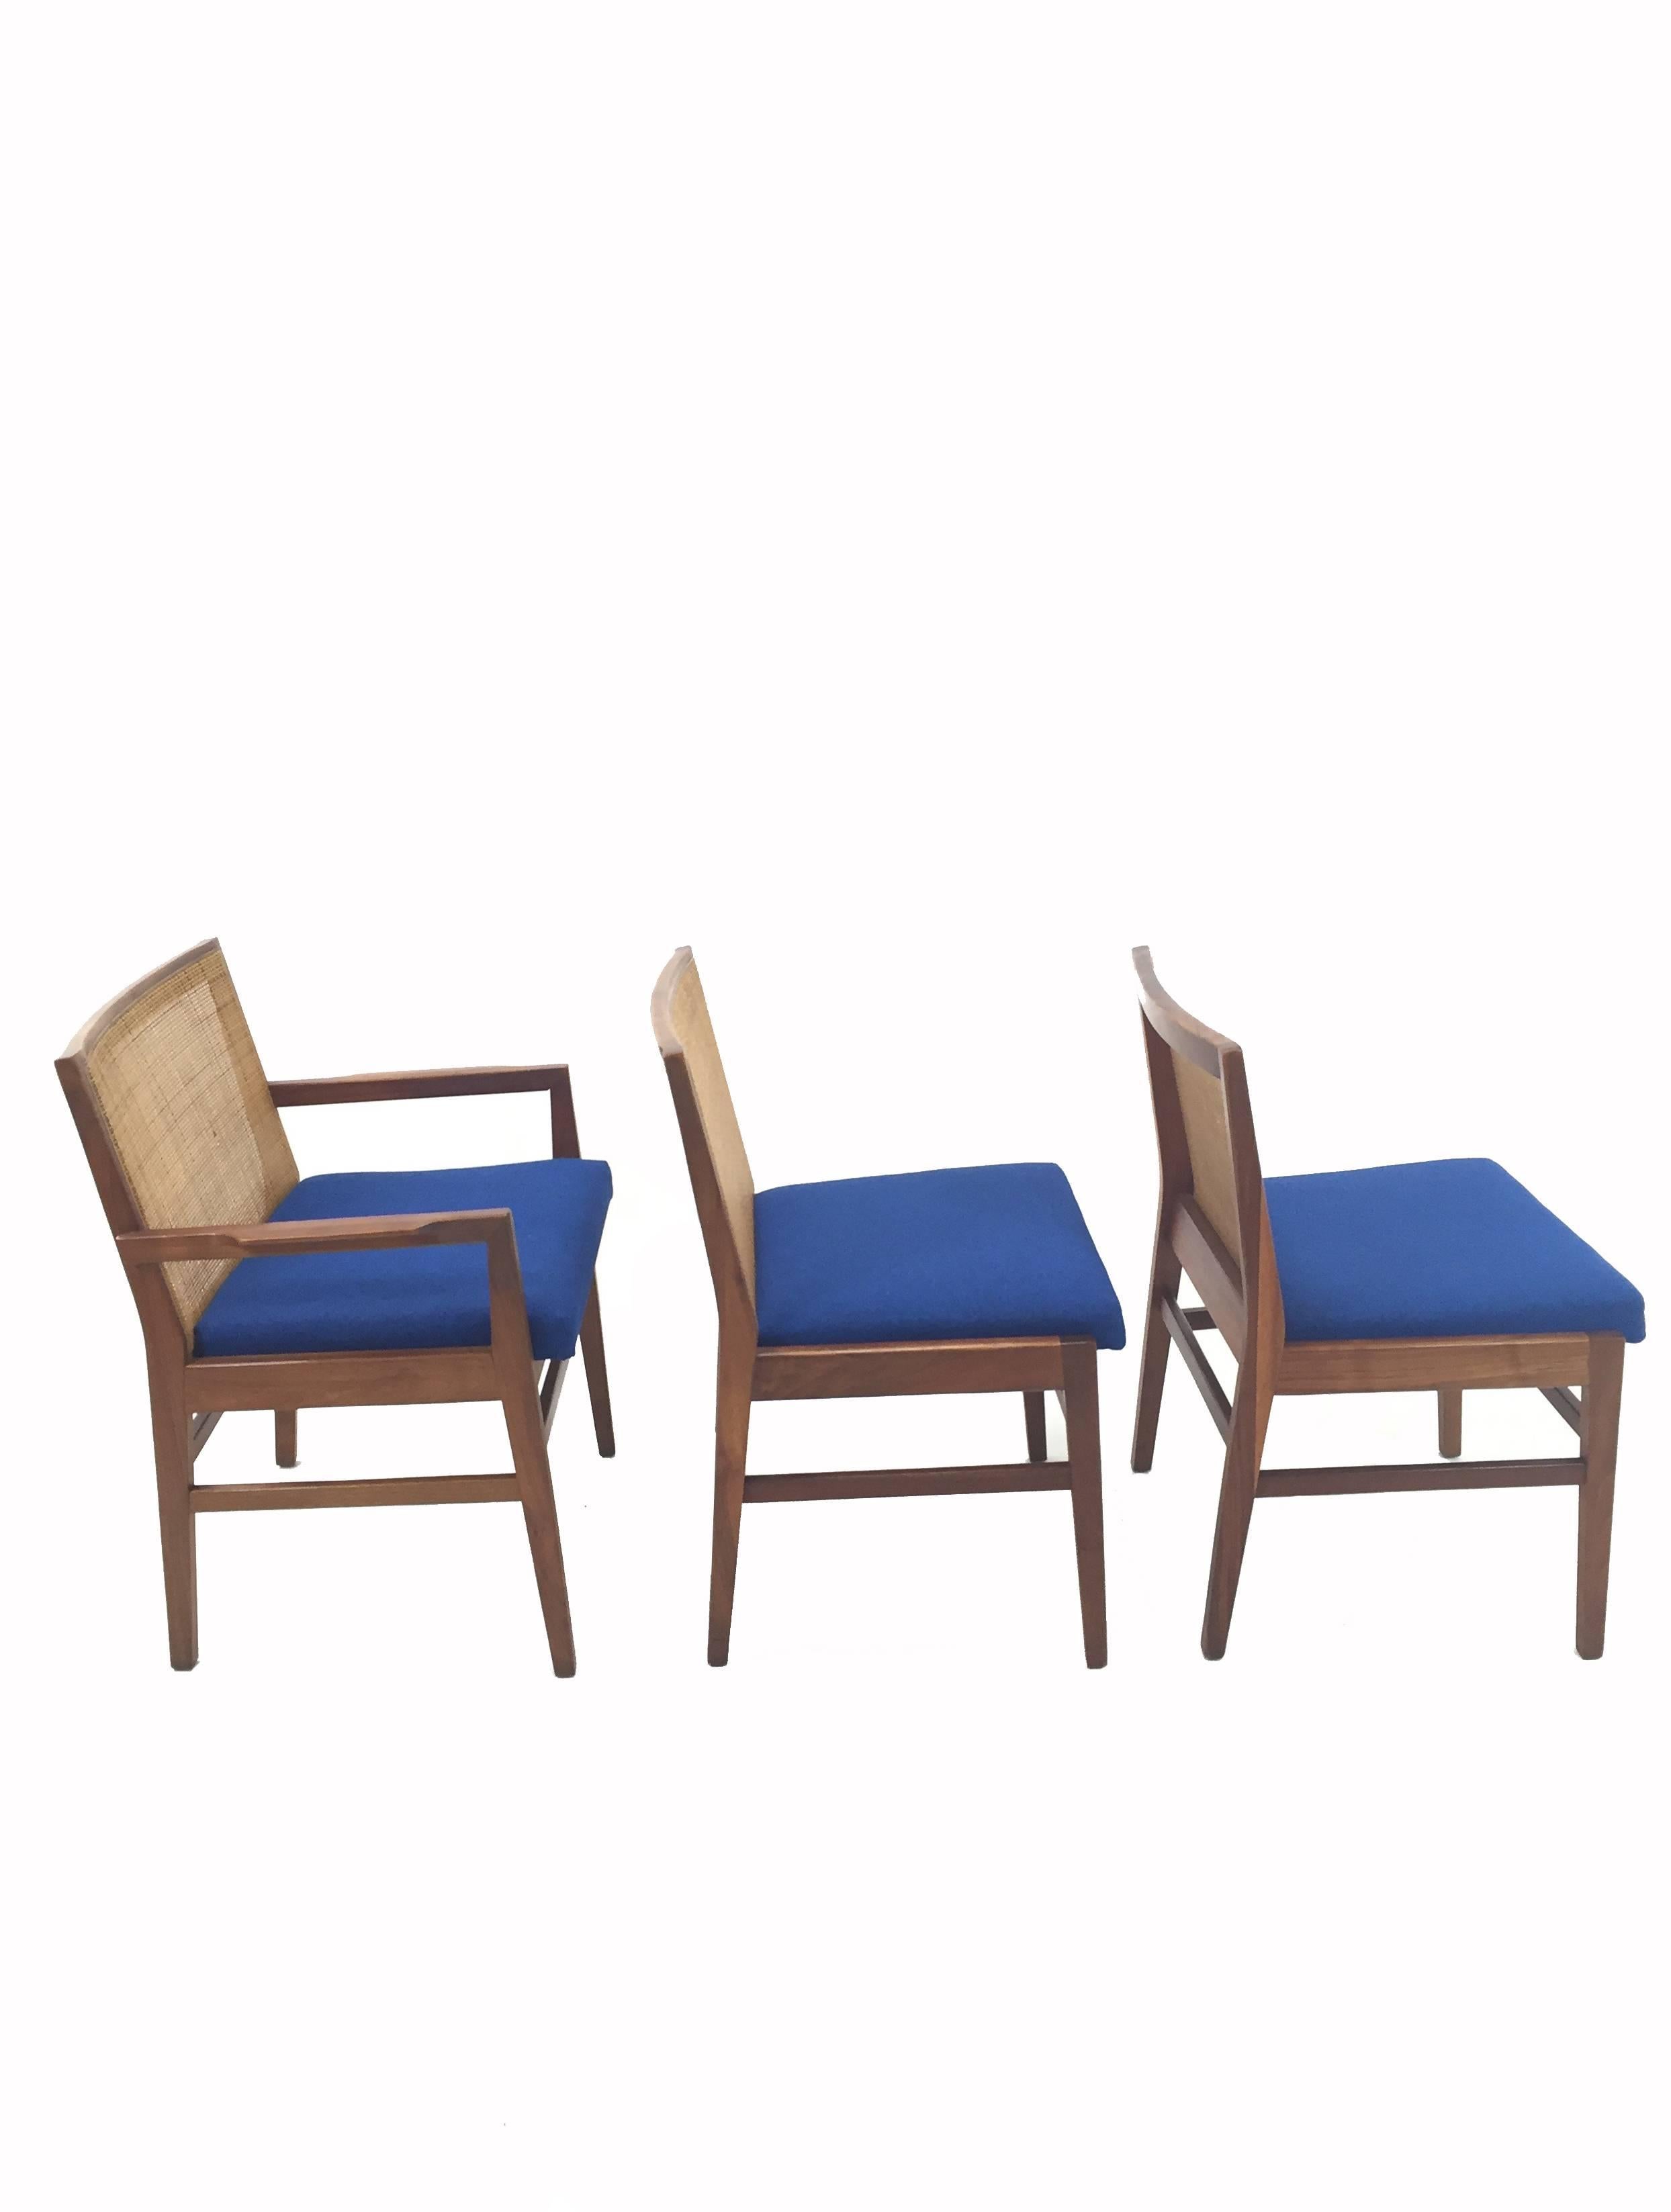 Set of six solid American cane and black walnut Milo Baughman dining chairs for the Arch Gordon Furniture Co. Two armchairs and four side chairs. Caned panel in back and newly upholstered seat in cobalt tweed. Two or three fleabites (broken single